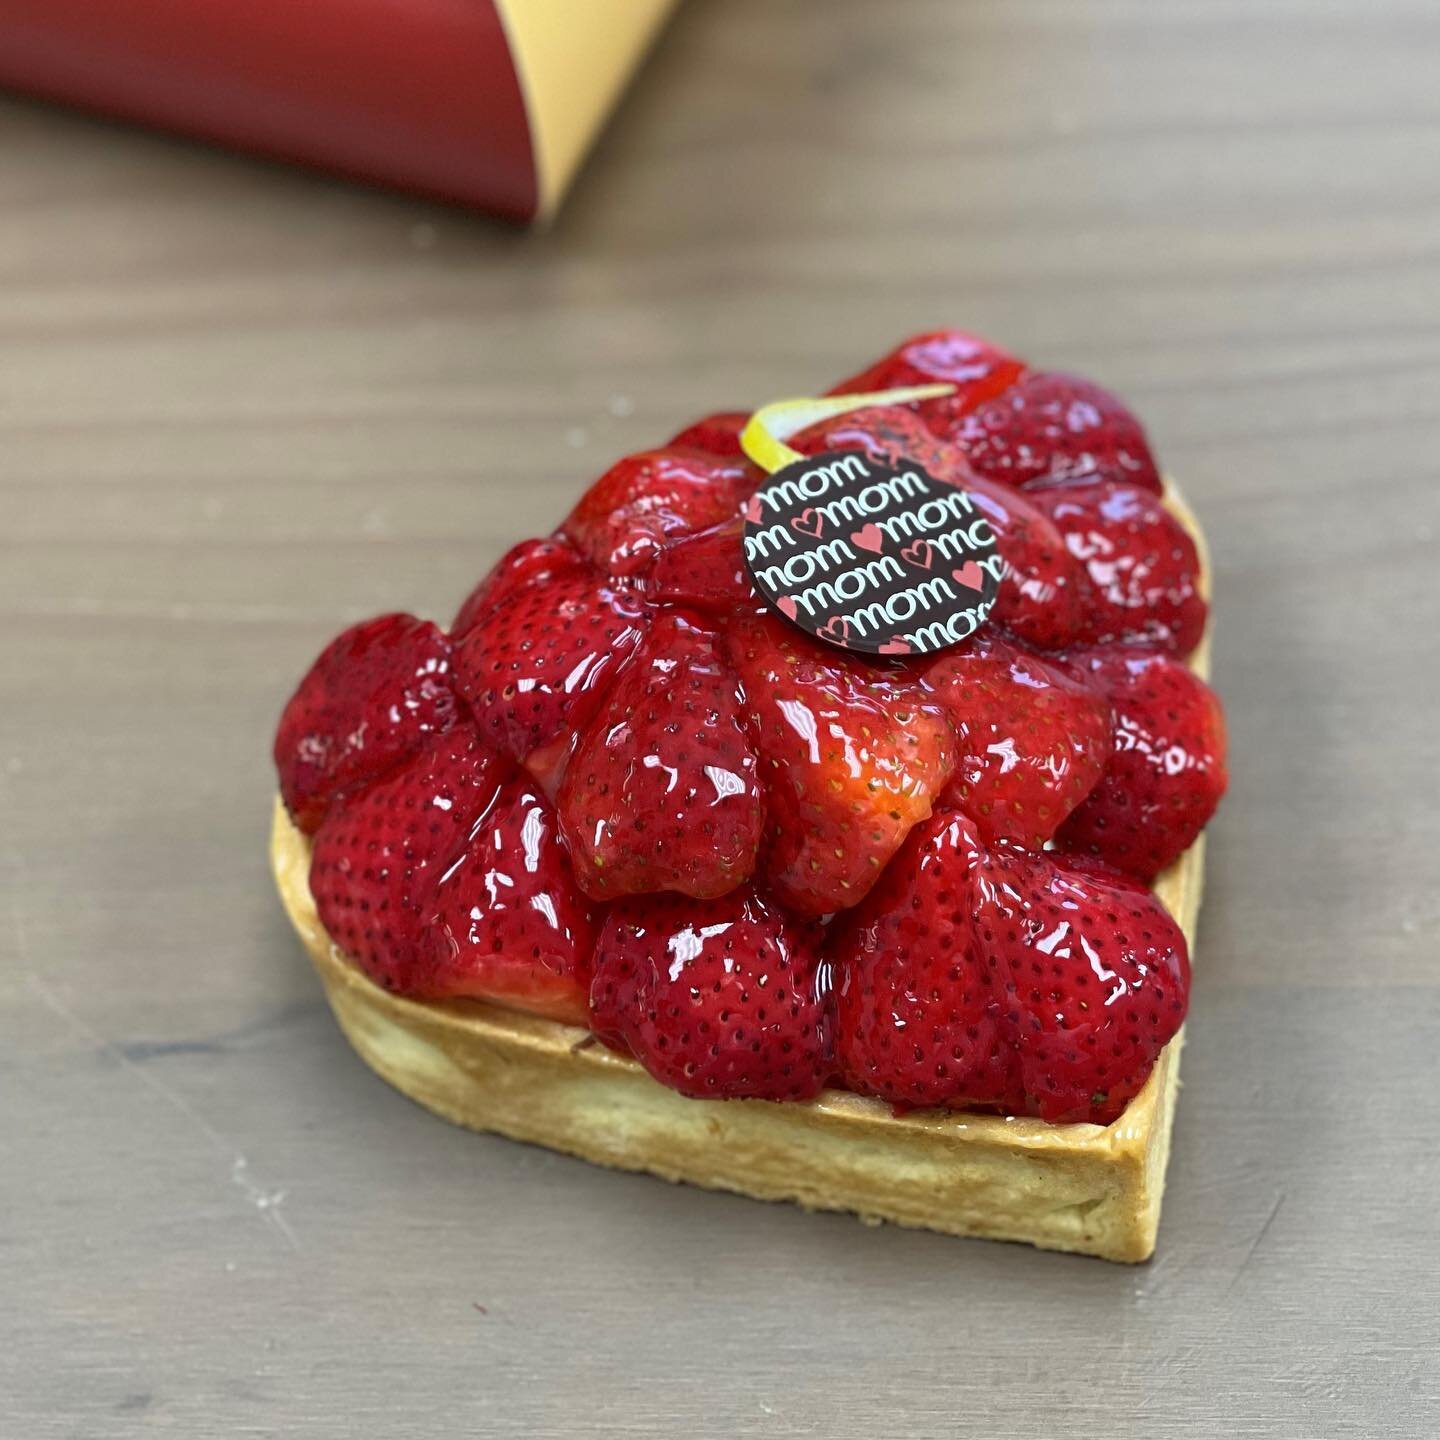 Some sweetness for Mother&rsquo;s Day:
A sweet dough covered with gelified strawberry coulis, lemon and lime creme Chiboust, a genoise, and fresh strawberries.
Available starting Friday!
Preorder encouraged as we will only be able to make a limited a